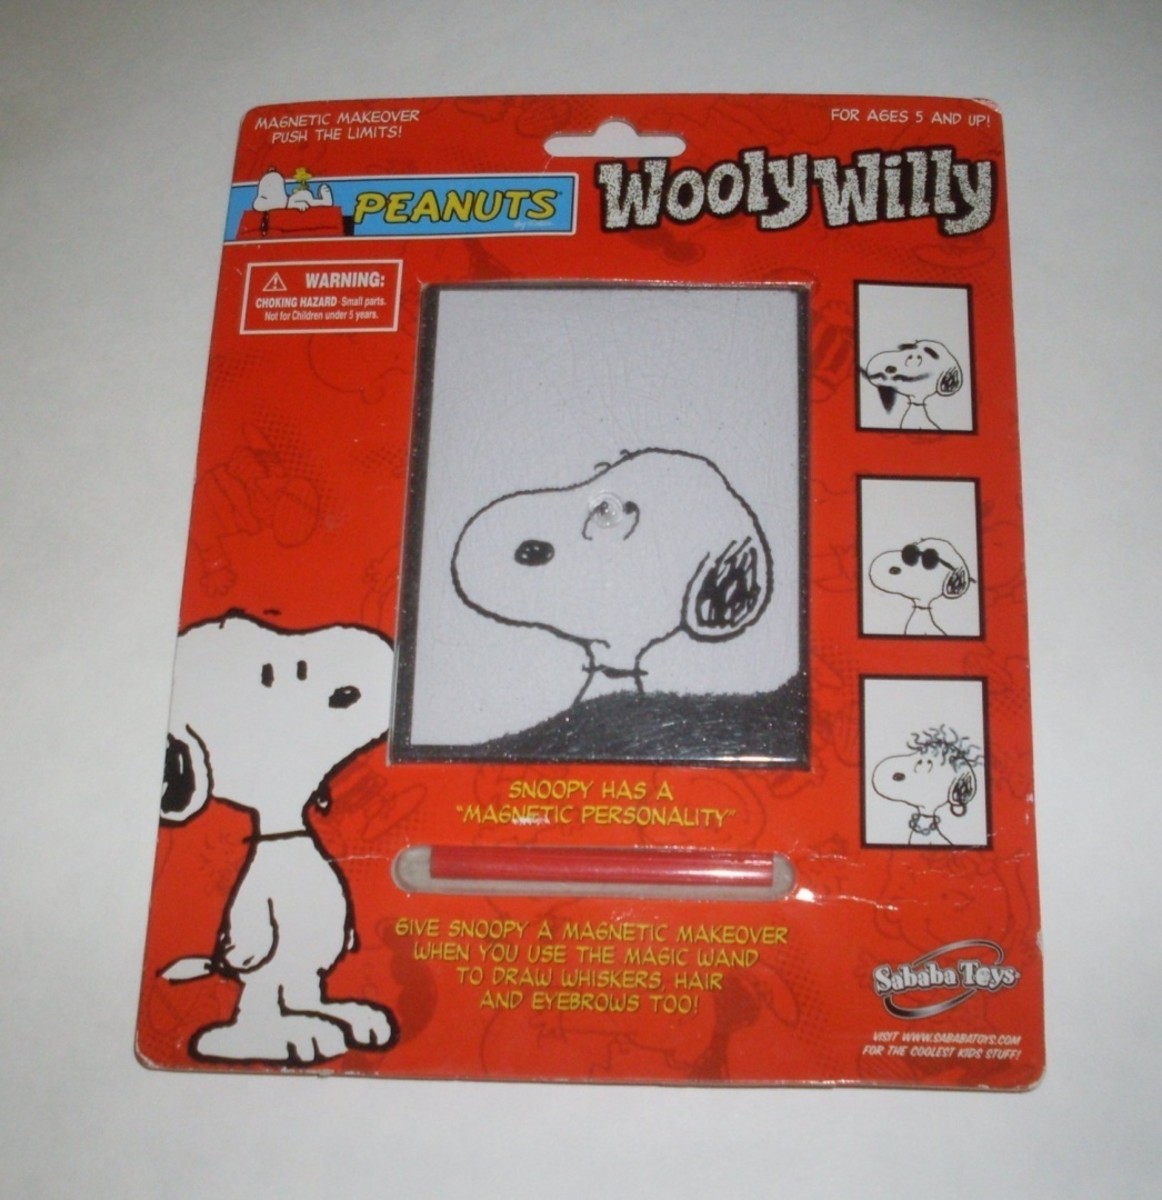 And last but not least, you have Wooly Willy!  A magnet "pencil" arranges metal shavings under the plastic to create all kinds of designs!  I bet everyone had at least one of these when they were a kid!